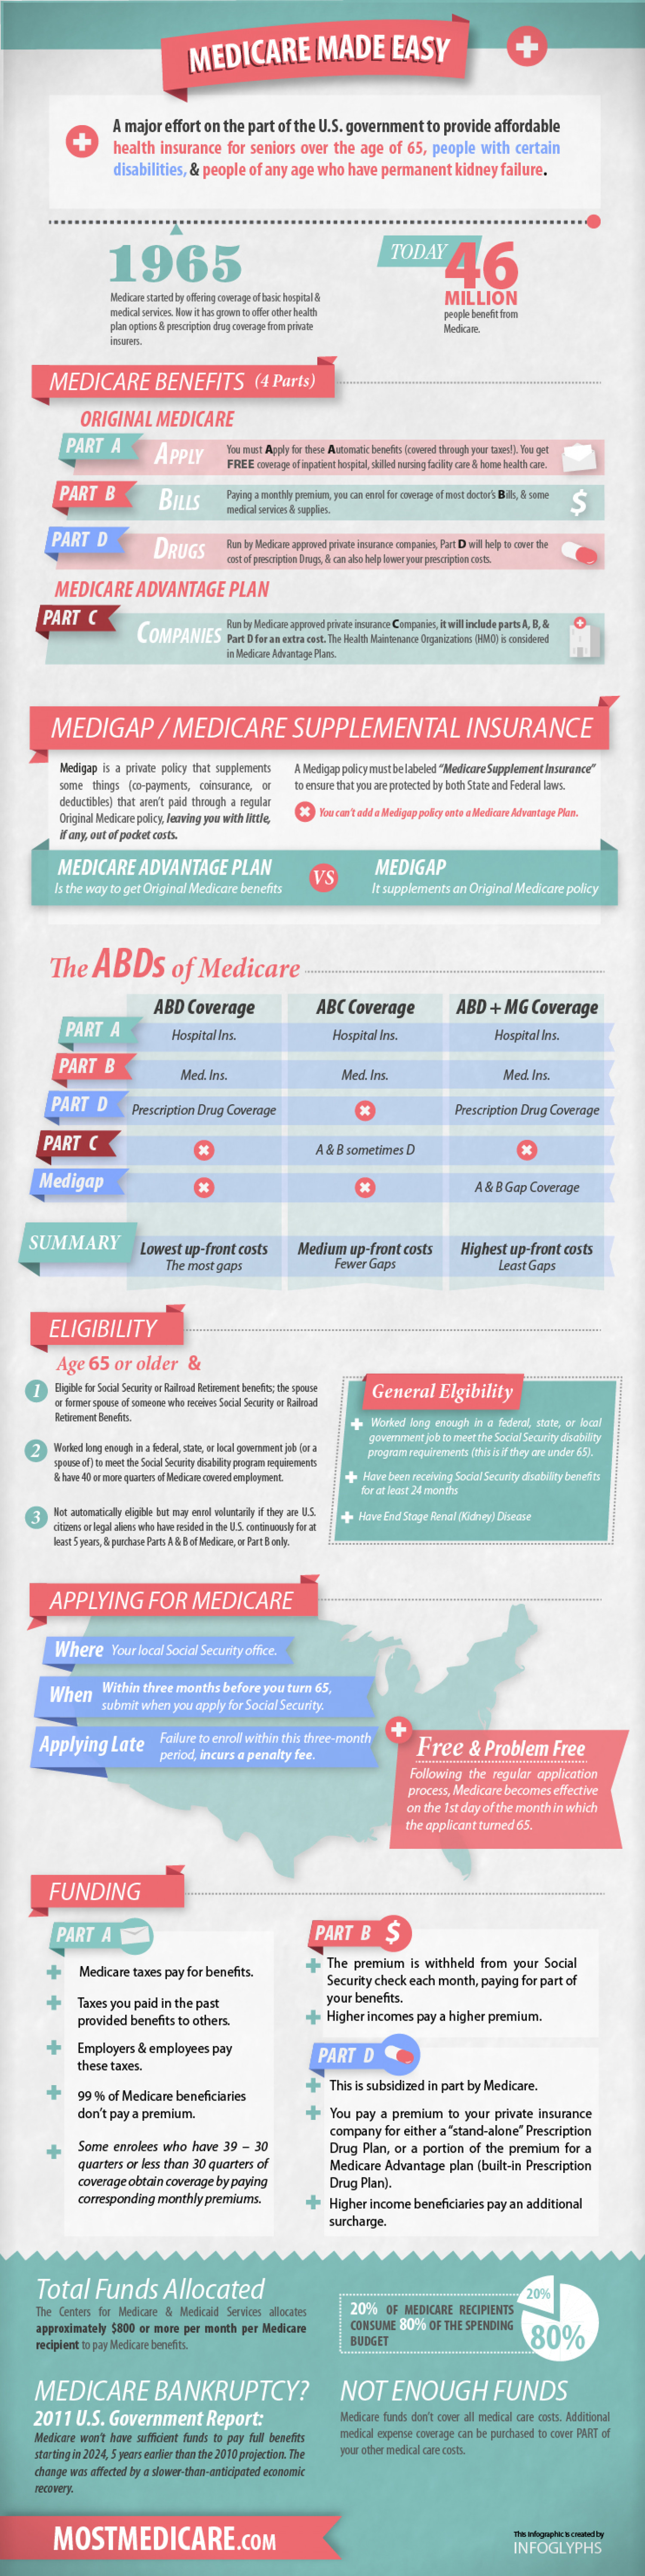 Medicare Made Easy Infographic